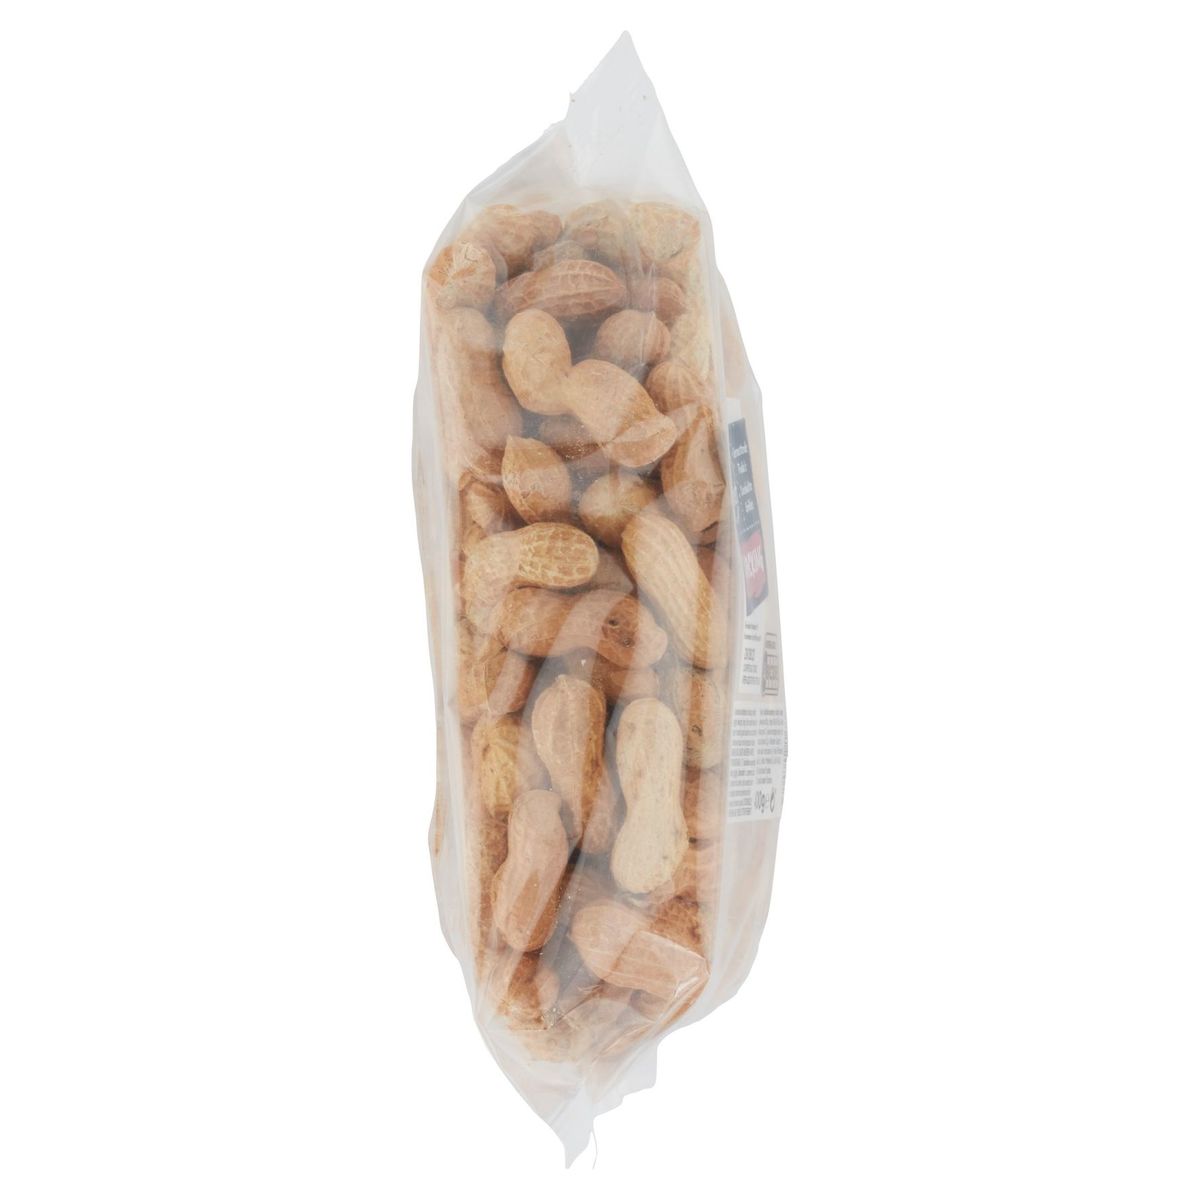 Carrefour The Market Snacking Geroosterde Pinda's 400 g